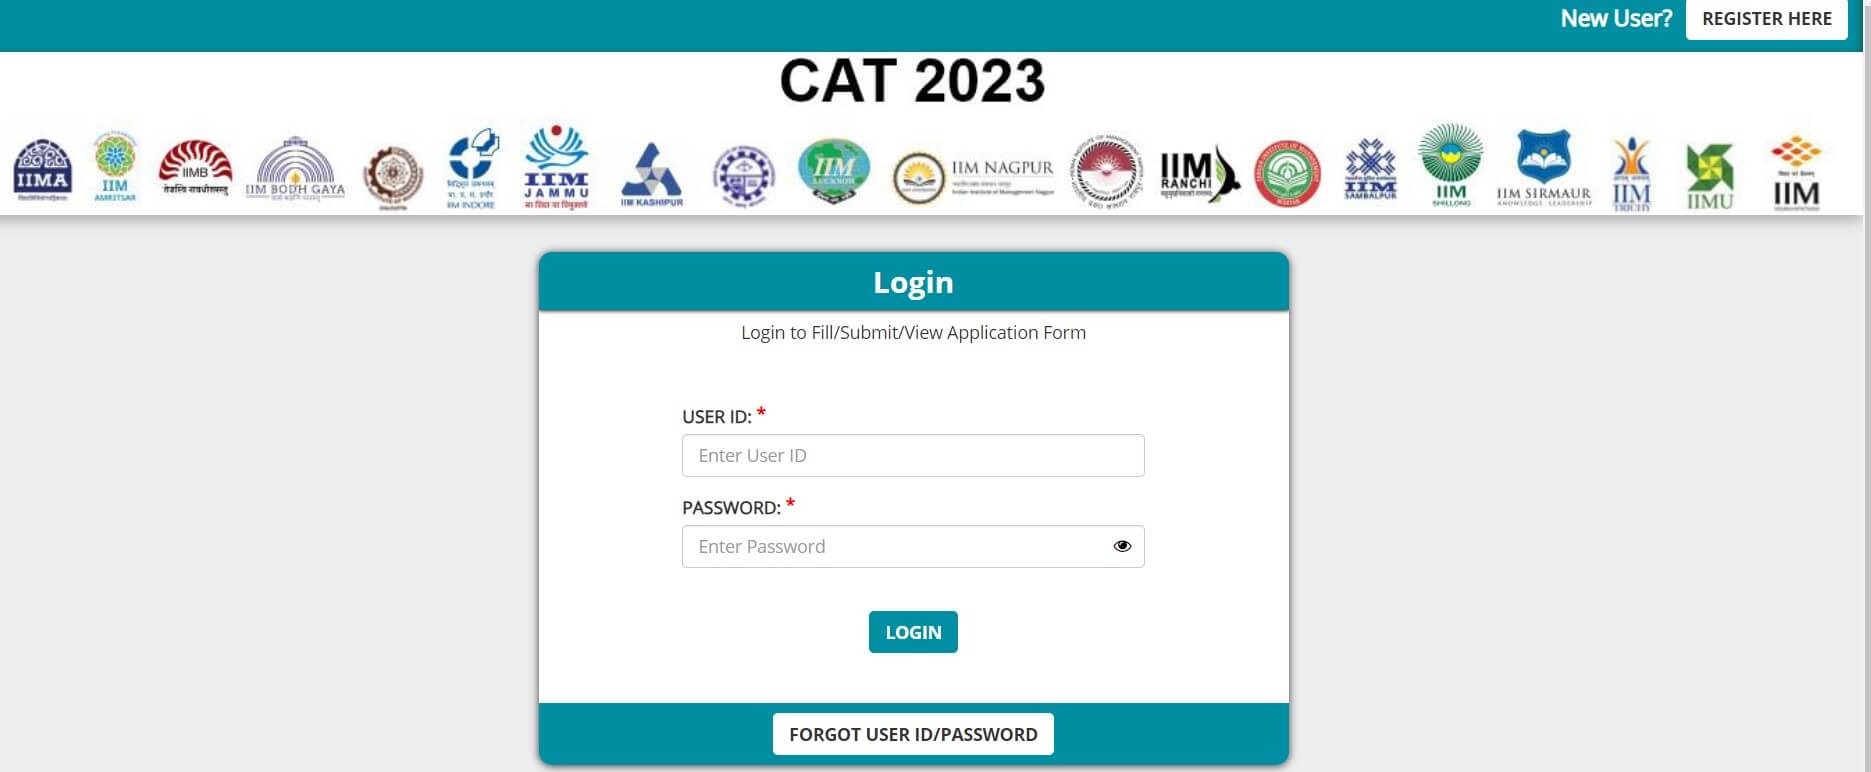 Here is the CAT exam 2023 admit card login page